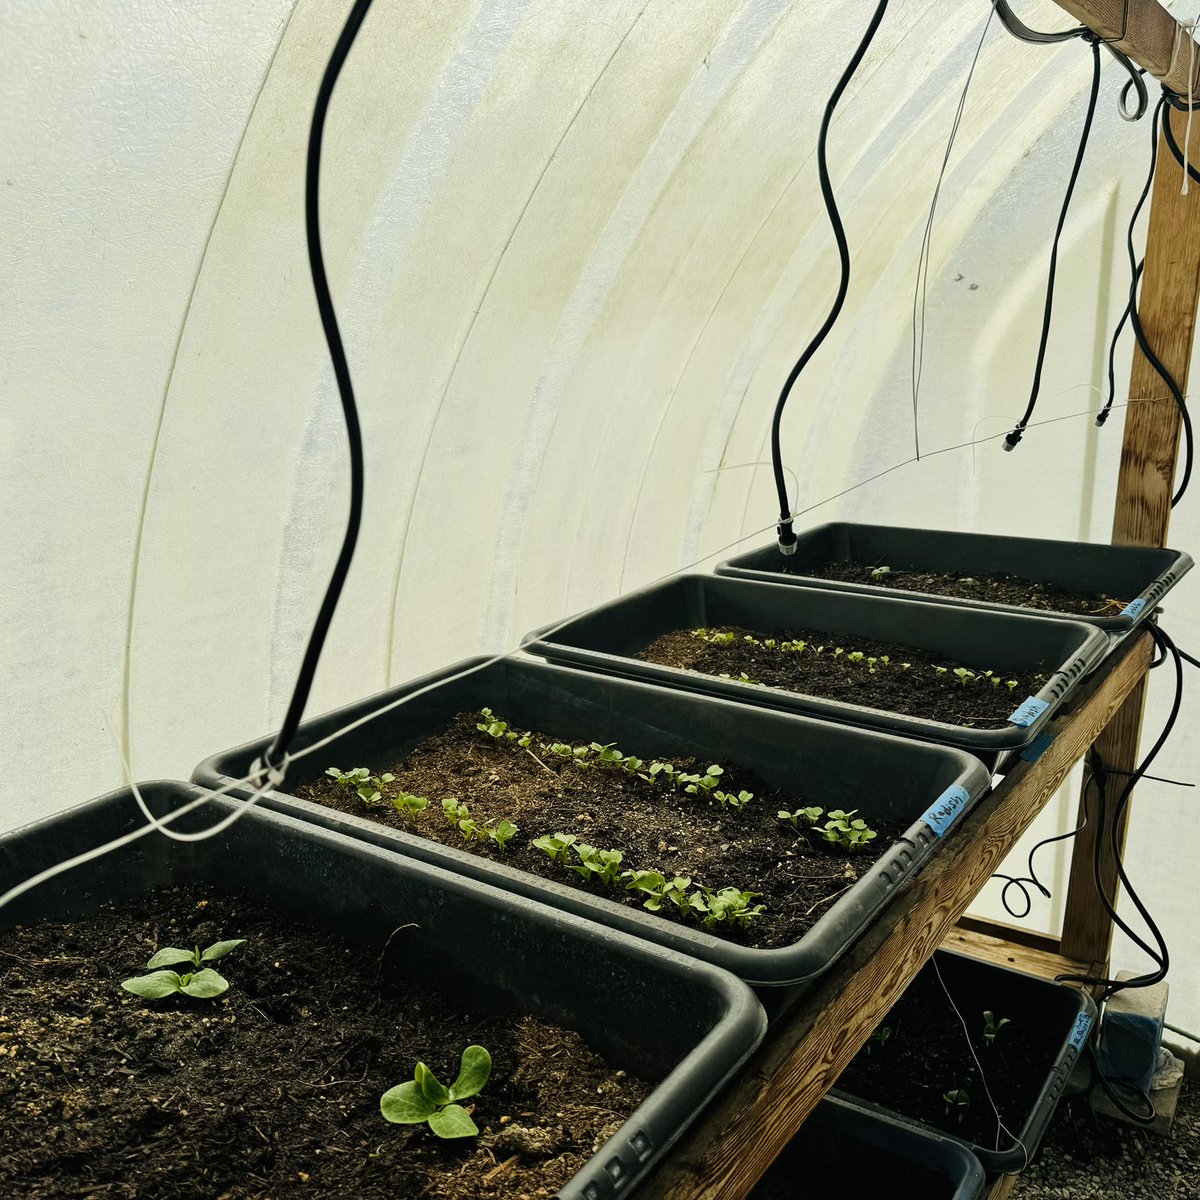 Radishes, squash, pumpkins, and tomatoes, oh my! My sweet husband and one of my equally sweet boys added a timed mister system to my greenhouse to save my starts from my forgetfulness. #writerslife  #springiscoming #gardeningiswork #greenhousestarts #gardenstarts #veggiegarden